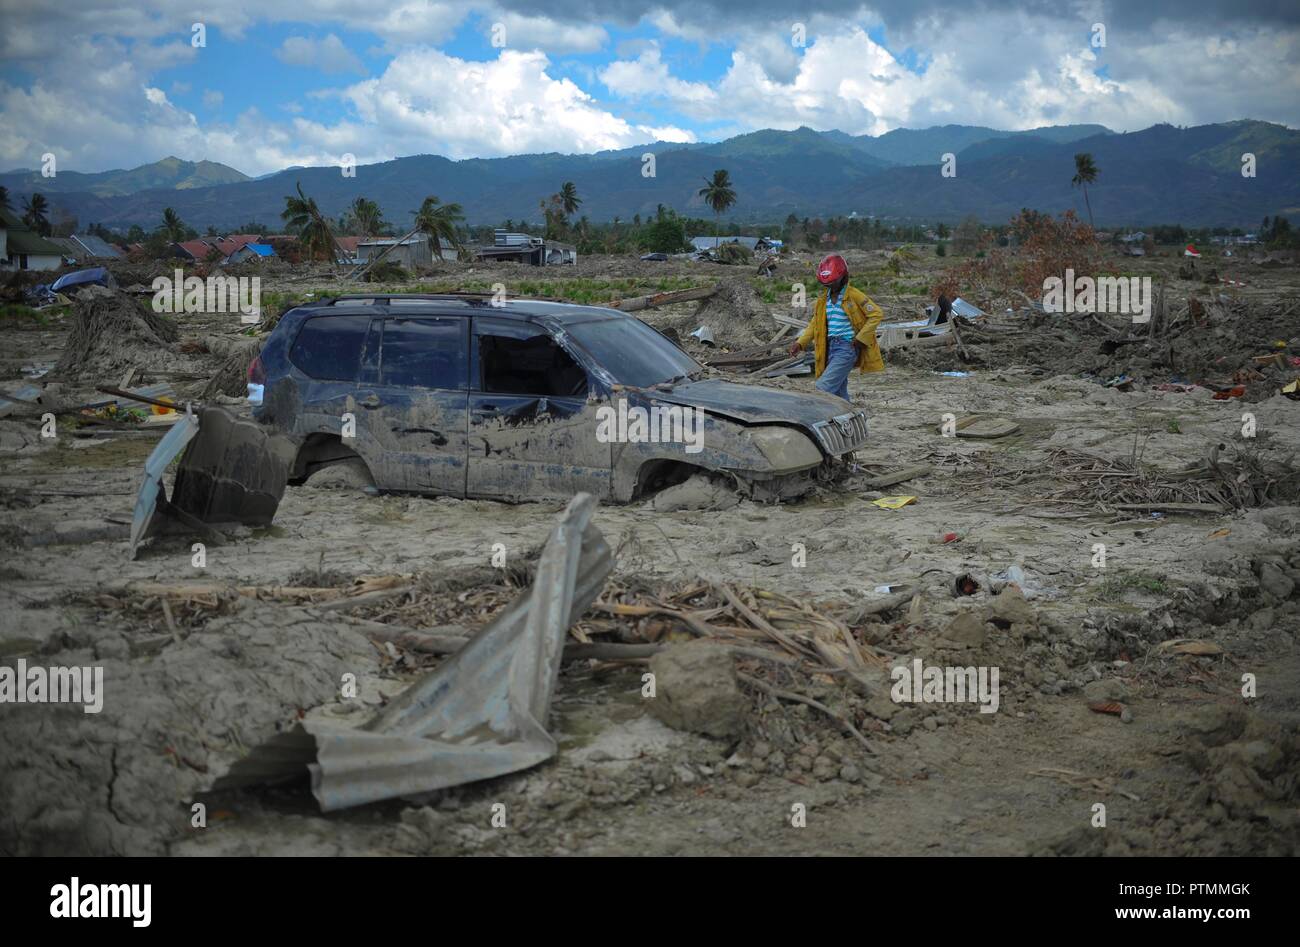 Poso, Indonesia. 9th Oct, 2018. A person walks on dried mud in Poso, Central Sulawesi Province, Indonesia, on Oct. 9, 2018. The earthquakes and the tsunami have killed at least 2,010 people, left over 5,000 others missing and triggered massive damage and a huge evacuation, according to the national disaster management agency. Credit: Zulkarnain/Xinhua/Alamy Live News Stock Photo